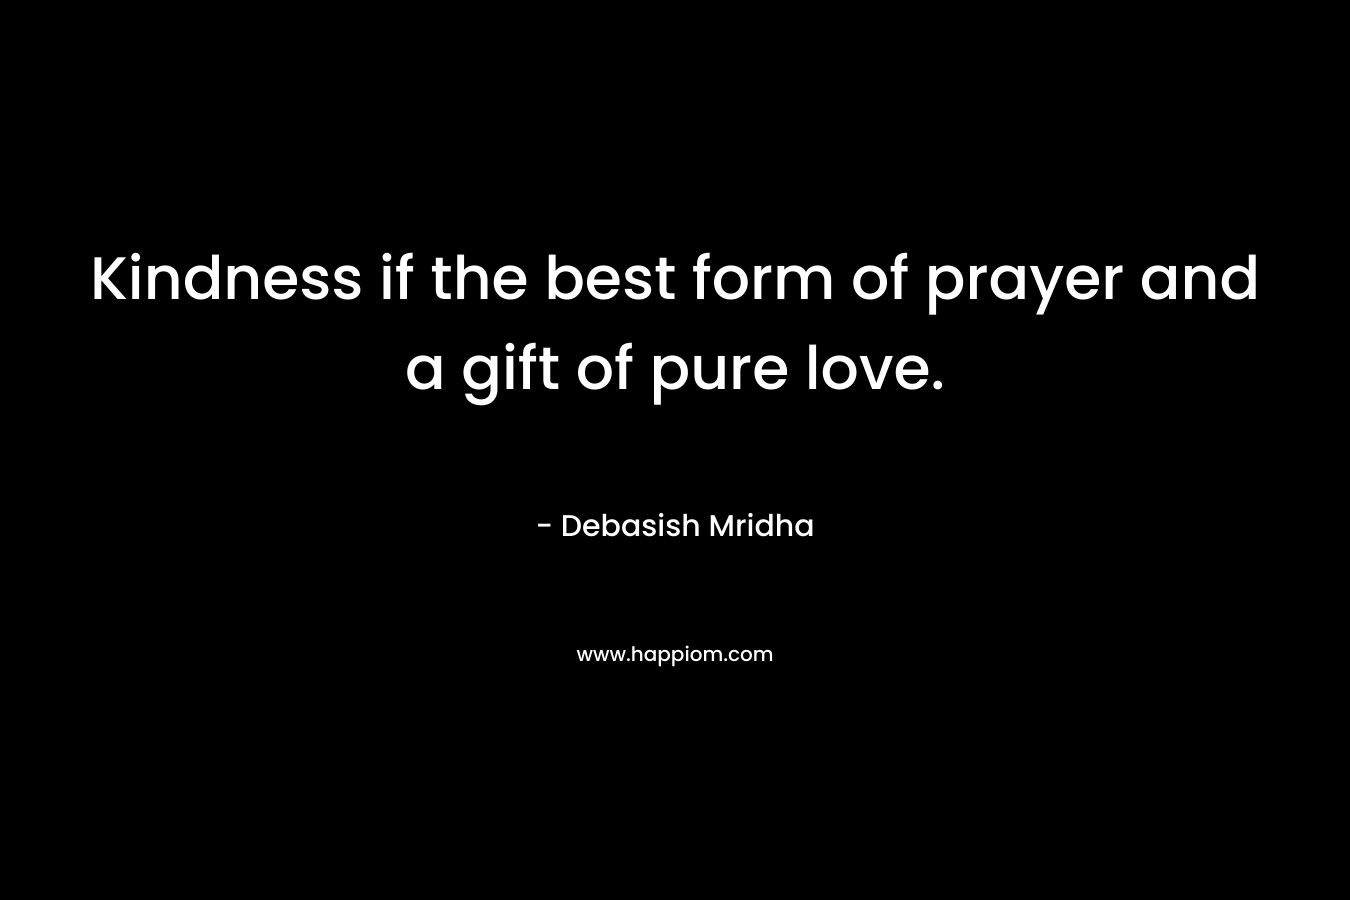 Kindness if the best form of prayer and a gift of pure love.